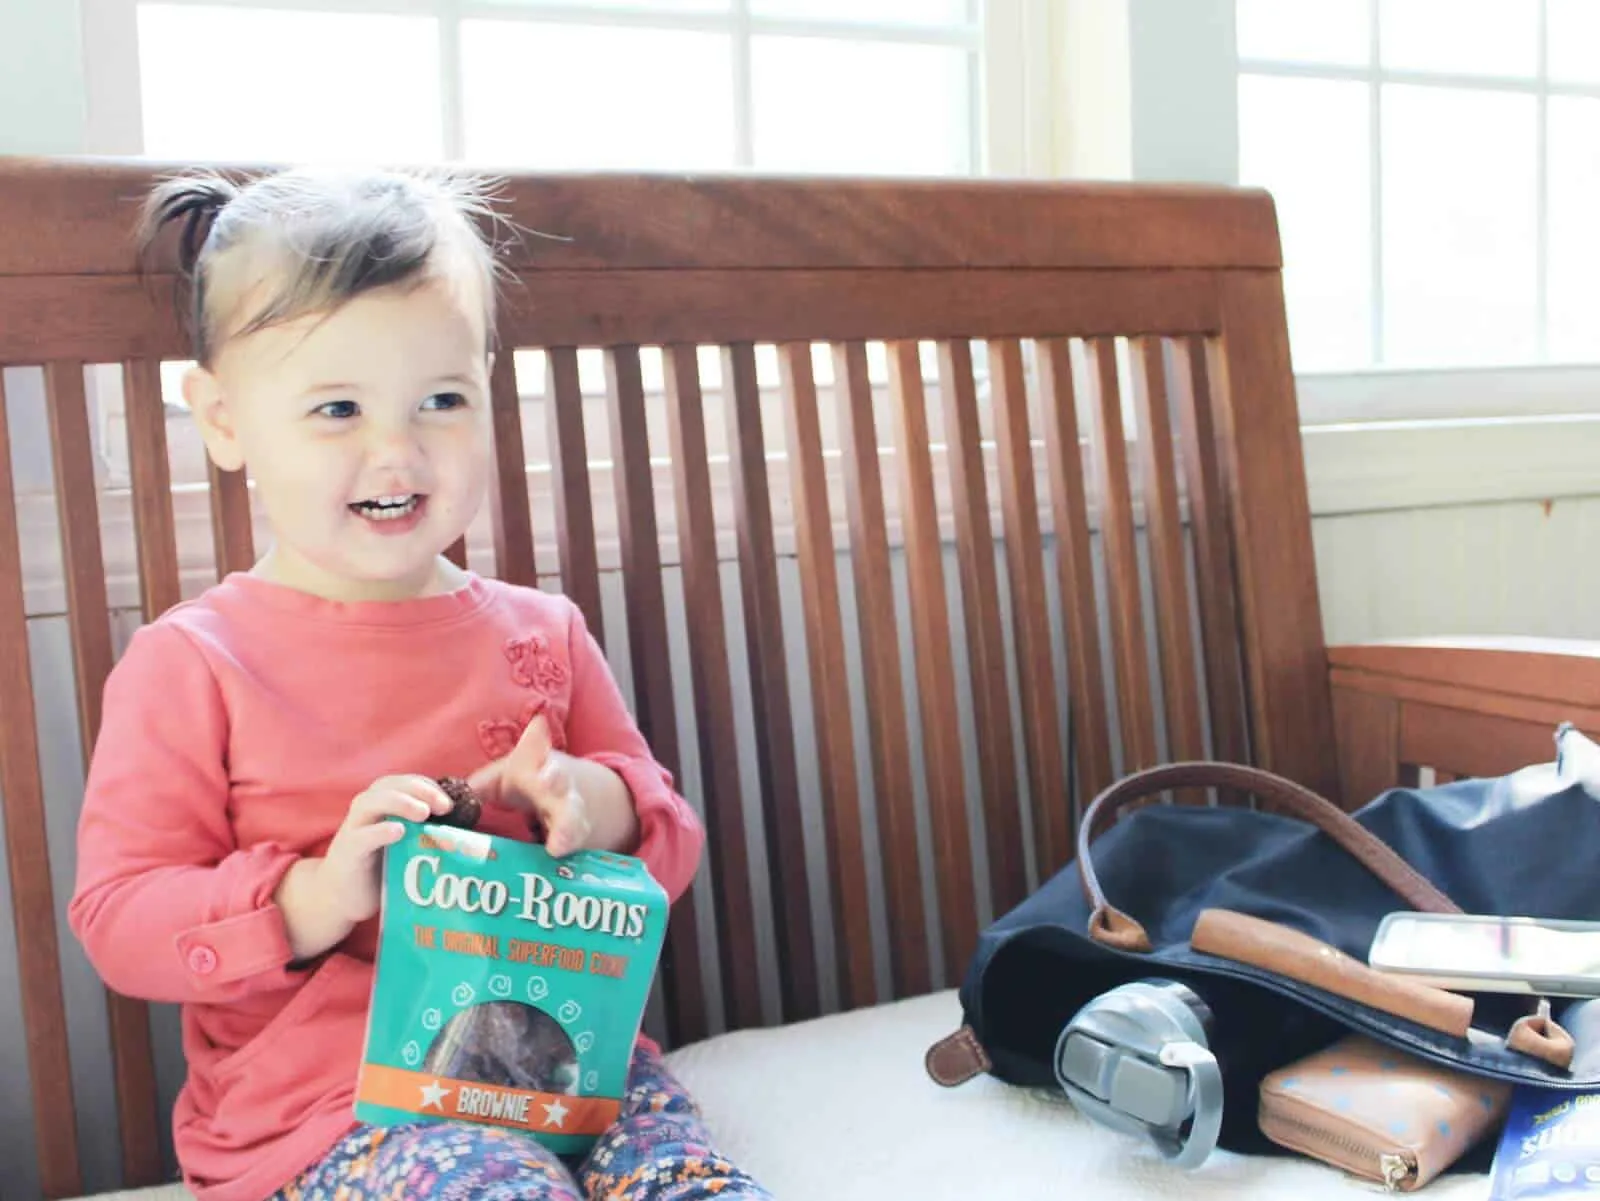 Toddler girl holds bag of Coco-Roons.